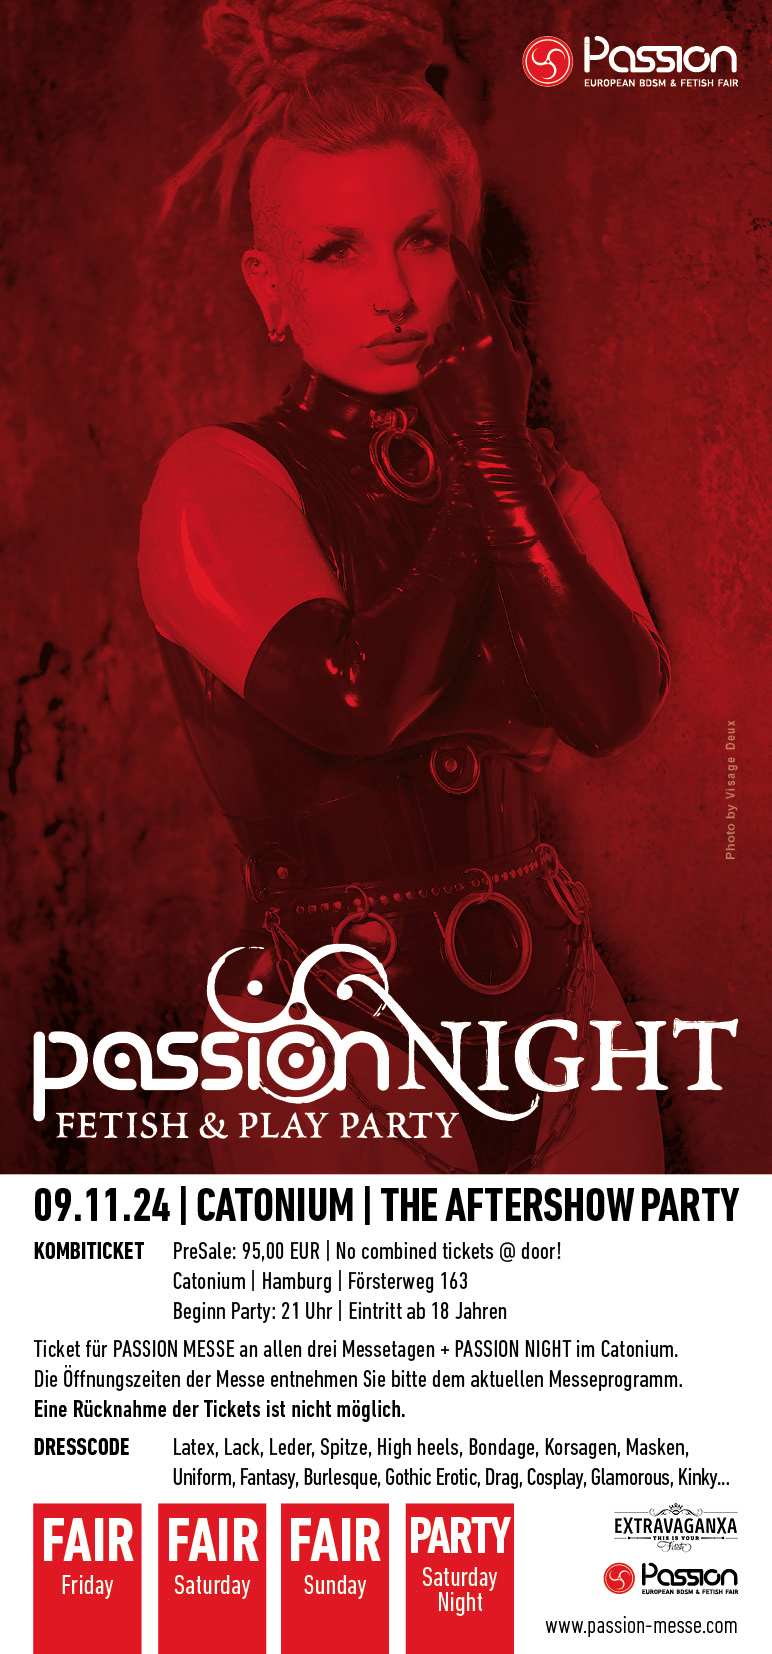 Passion Messe - Combiticket 3-Day-Exhibition + Passion Night